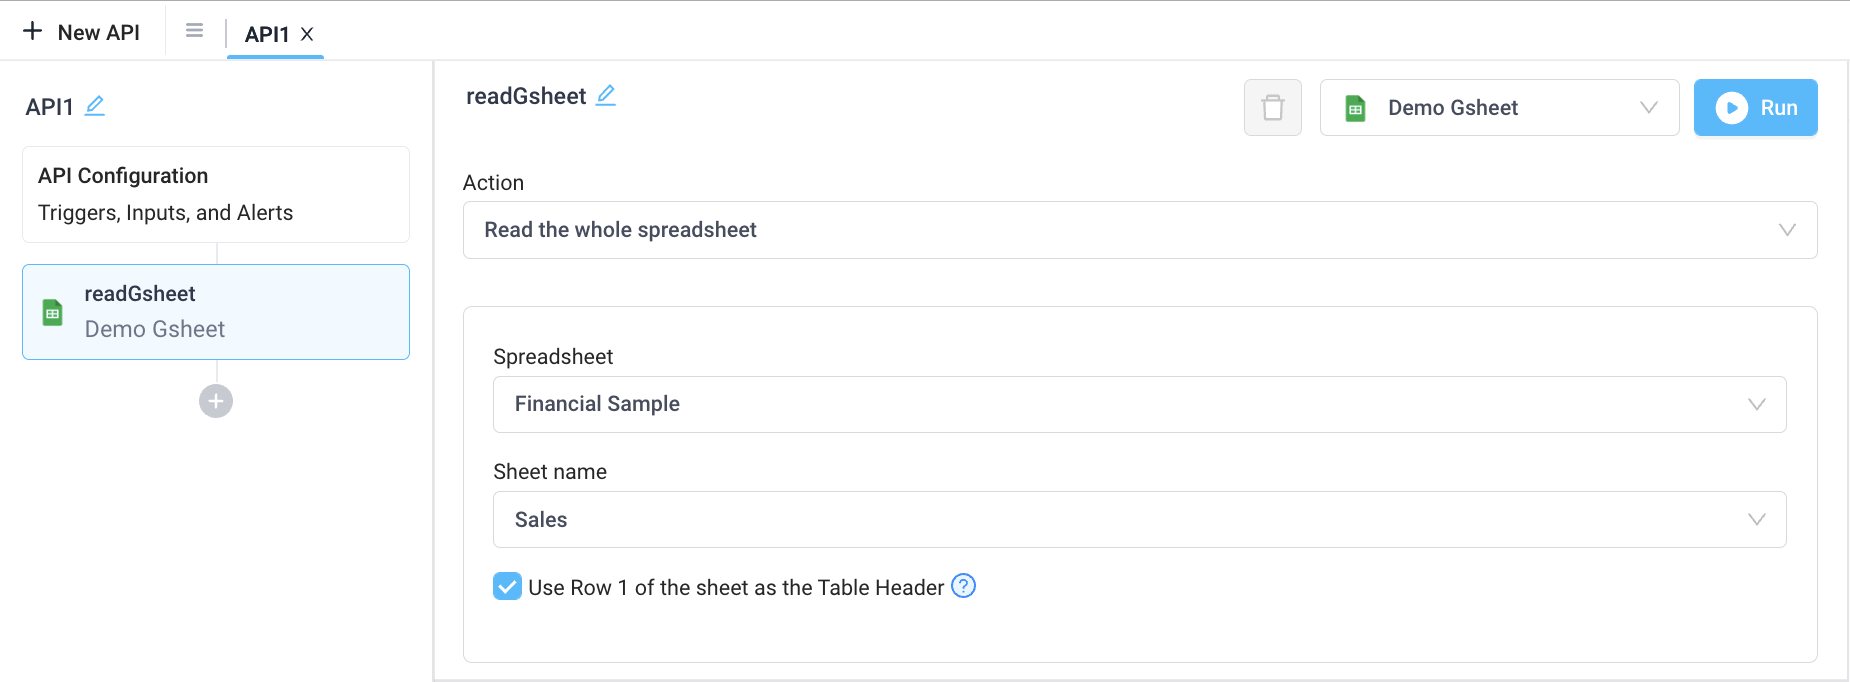 Read the whole spreadsheet to pull in data from Google Sheets